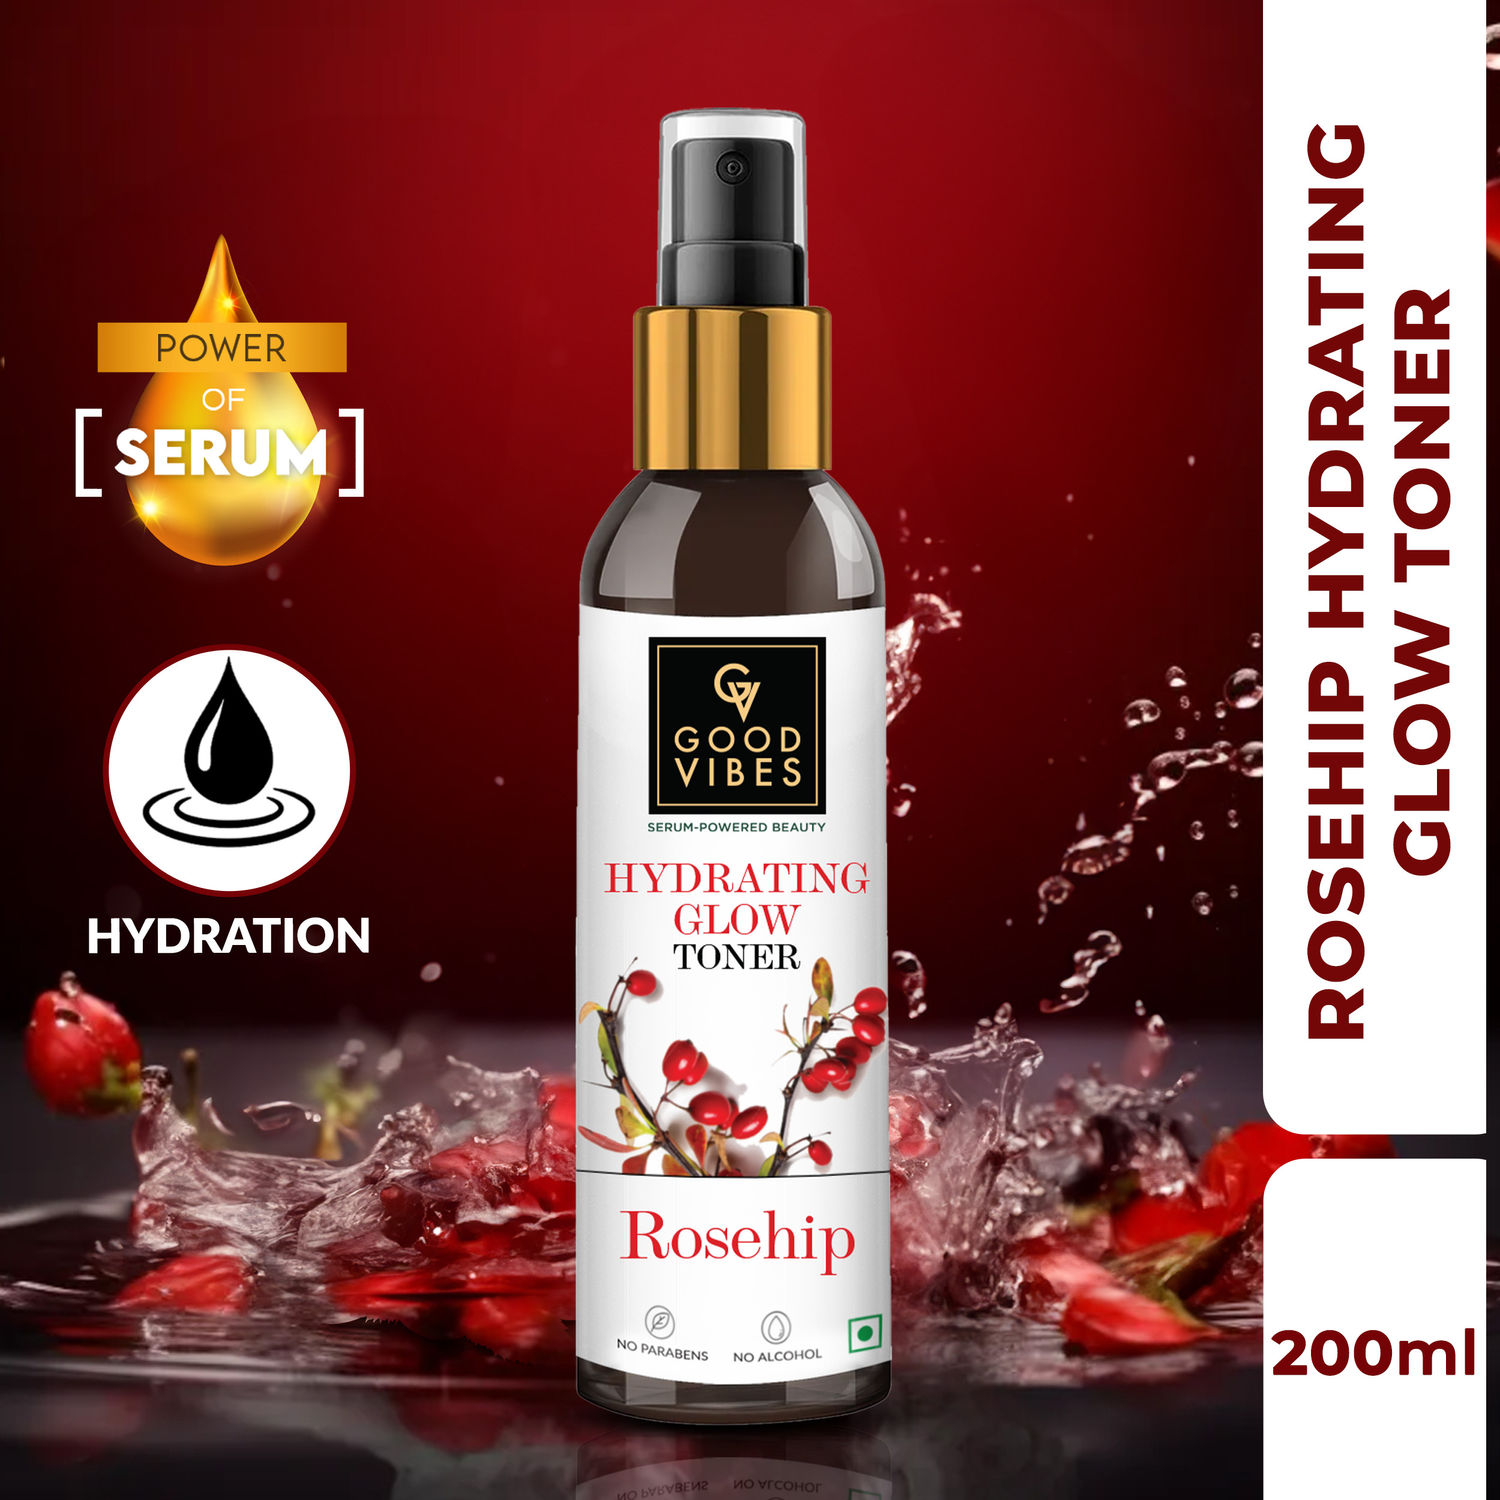 Buy Good Vibes Hydrating Glow Rosehip Toner with Power Of Serum (200 ml) - Purplle